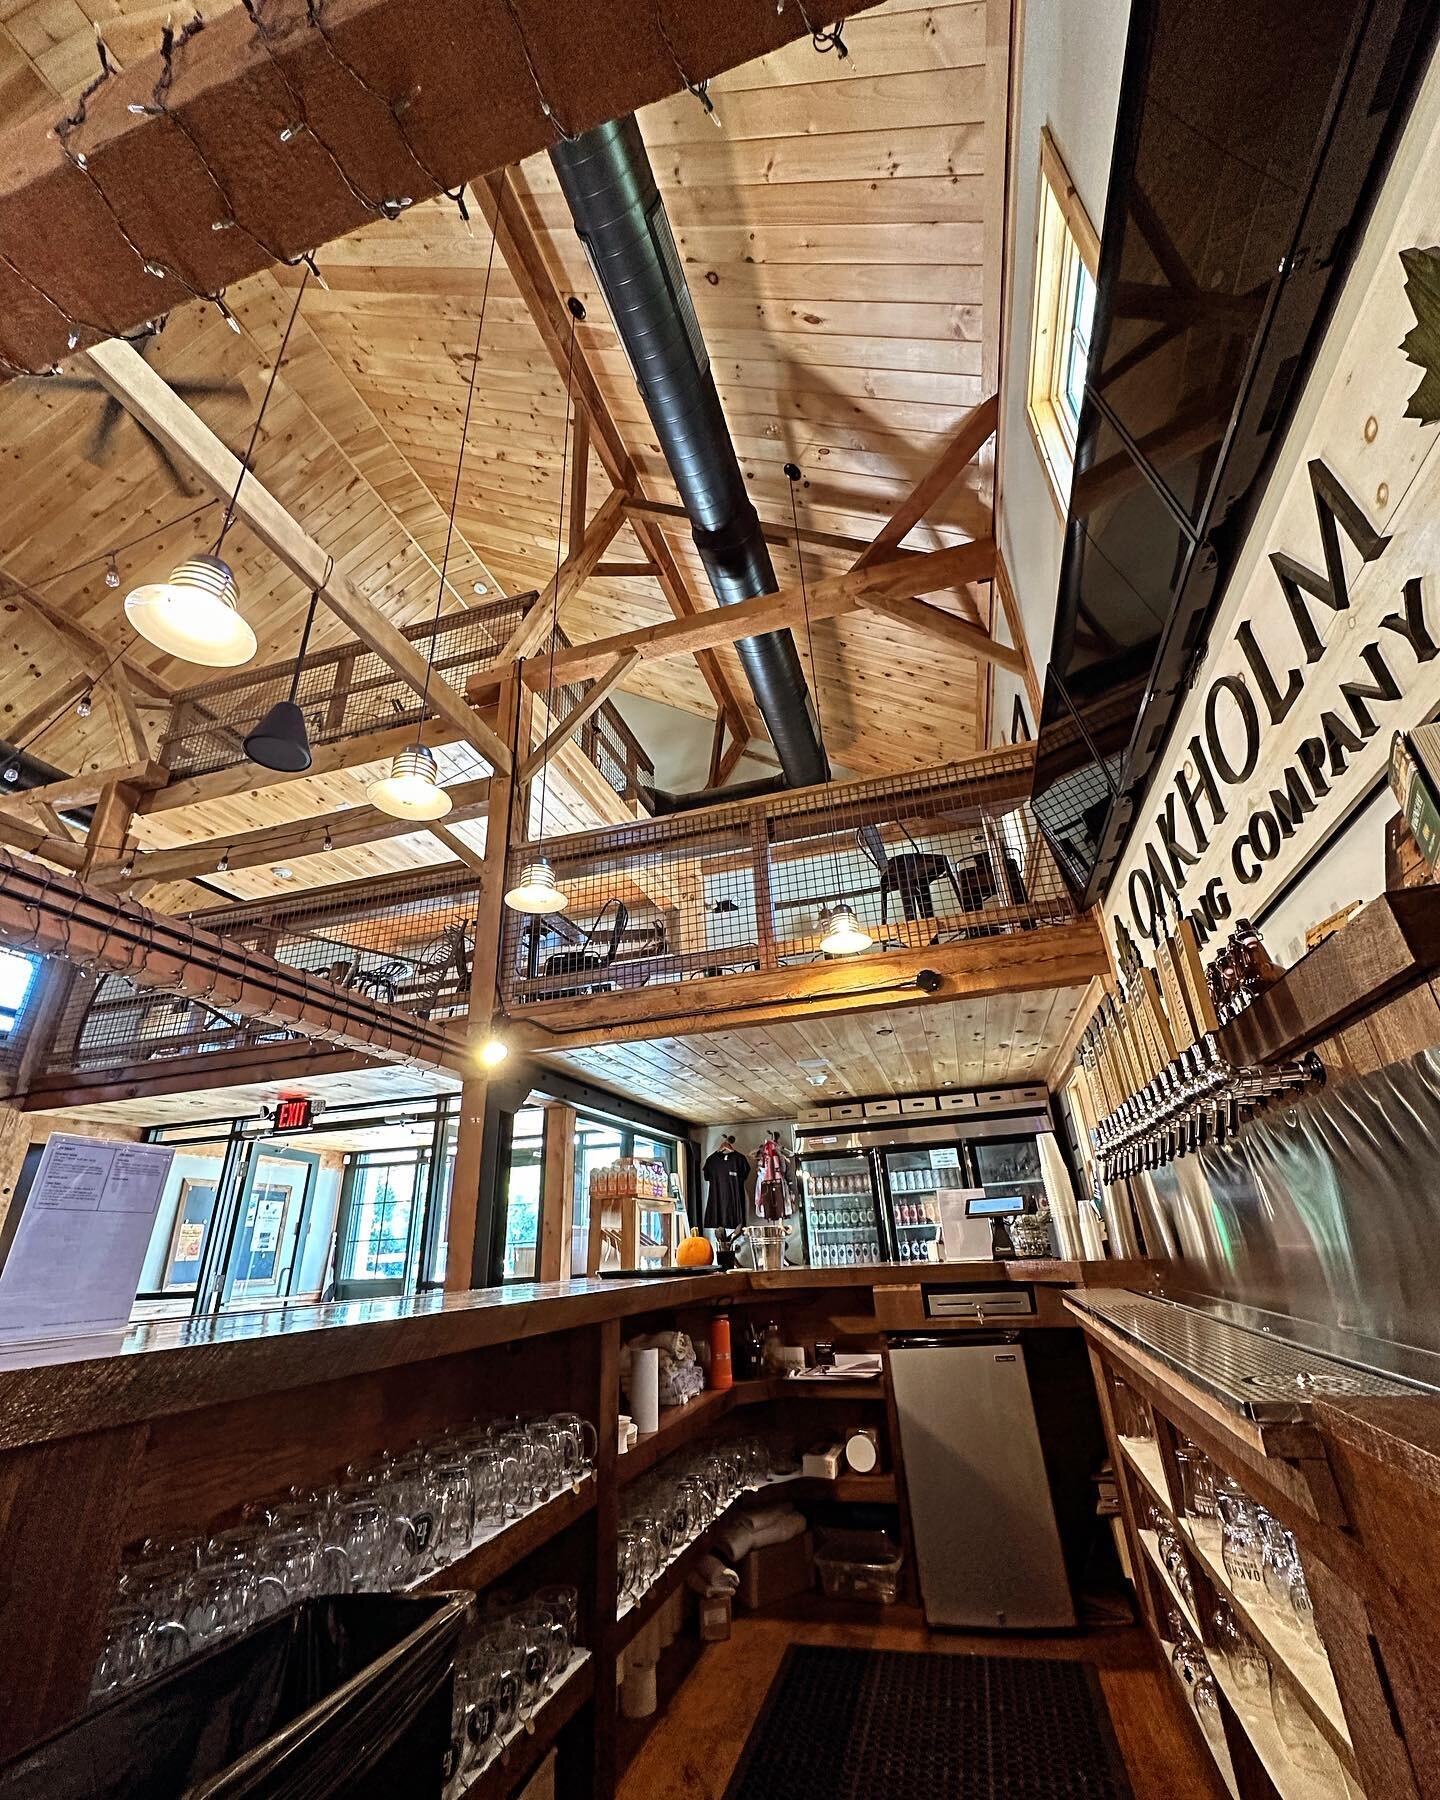 We finished up a camera installation over at @oakholmbrewing. This is a beautiful brewery with a disc golf course and event venue in Brookfield MA. Definitely worth a visit! #oakholmbrewery